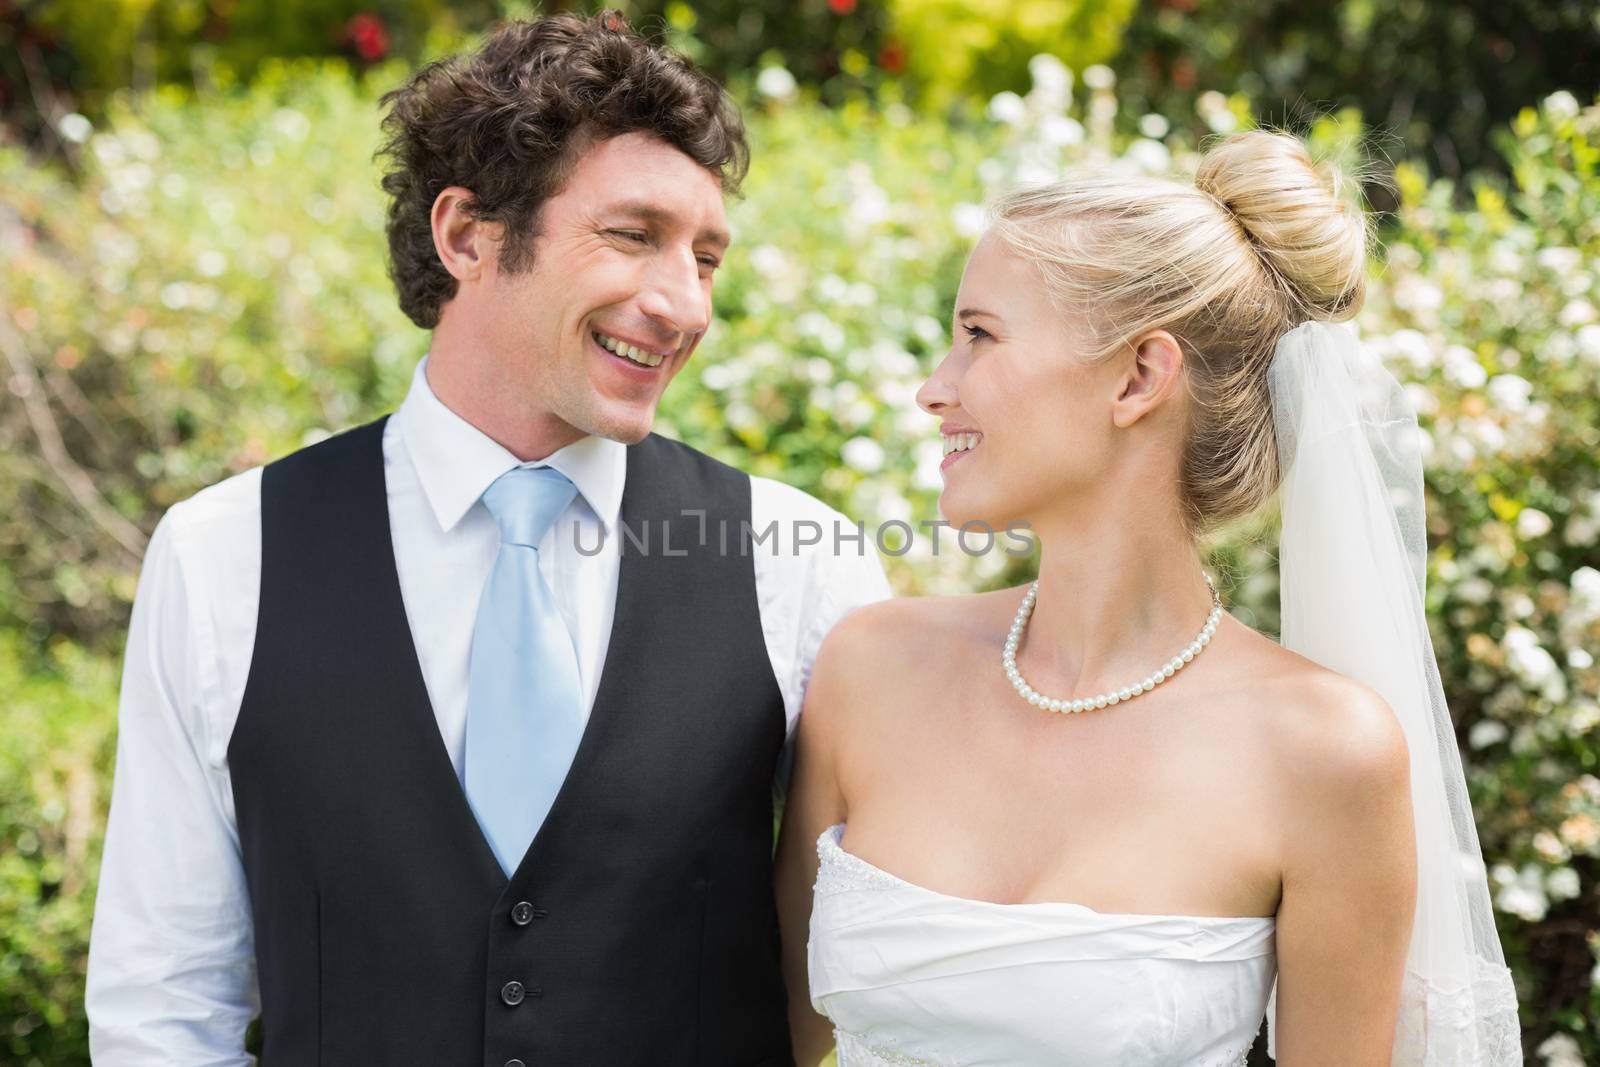 Romantic happy newlywed couple smiling at each other in the countryside